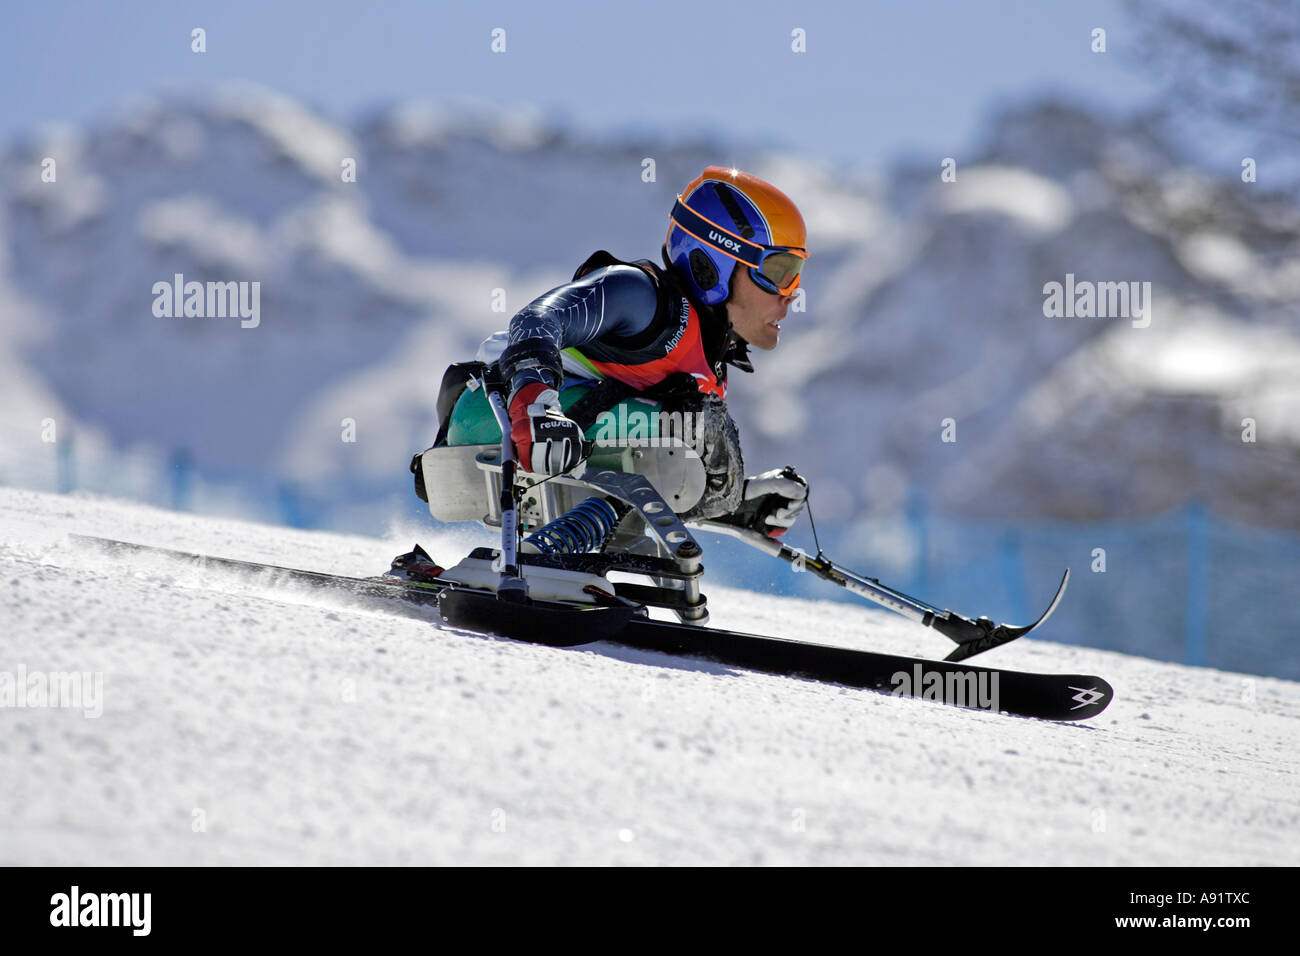 Tyler Walker LW12 2 of the USA in the Mens Alpine Skiing Super G Sitting competition Stock Photo